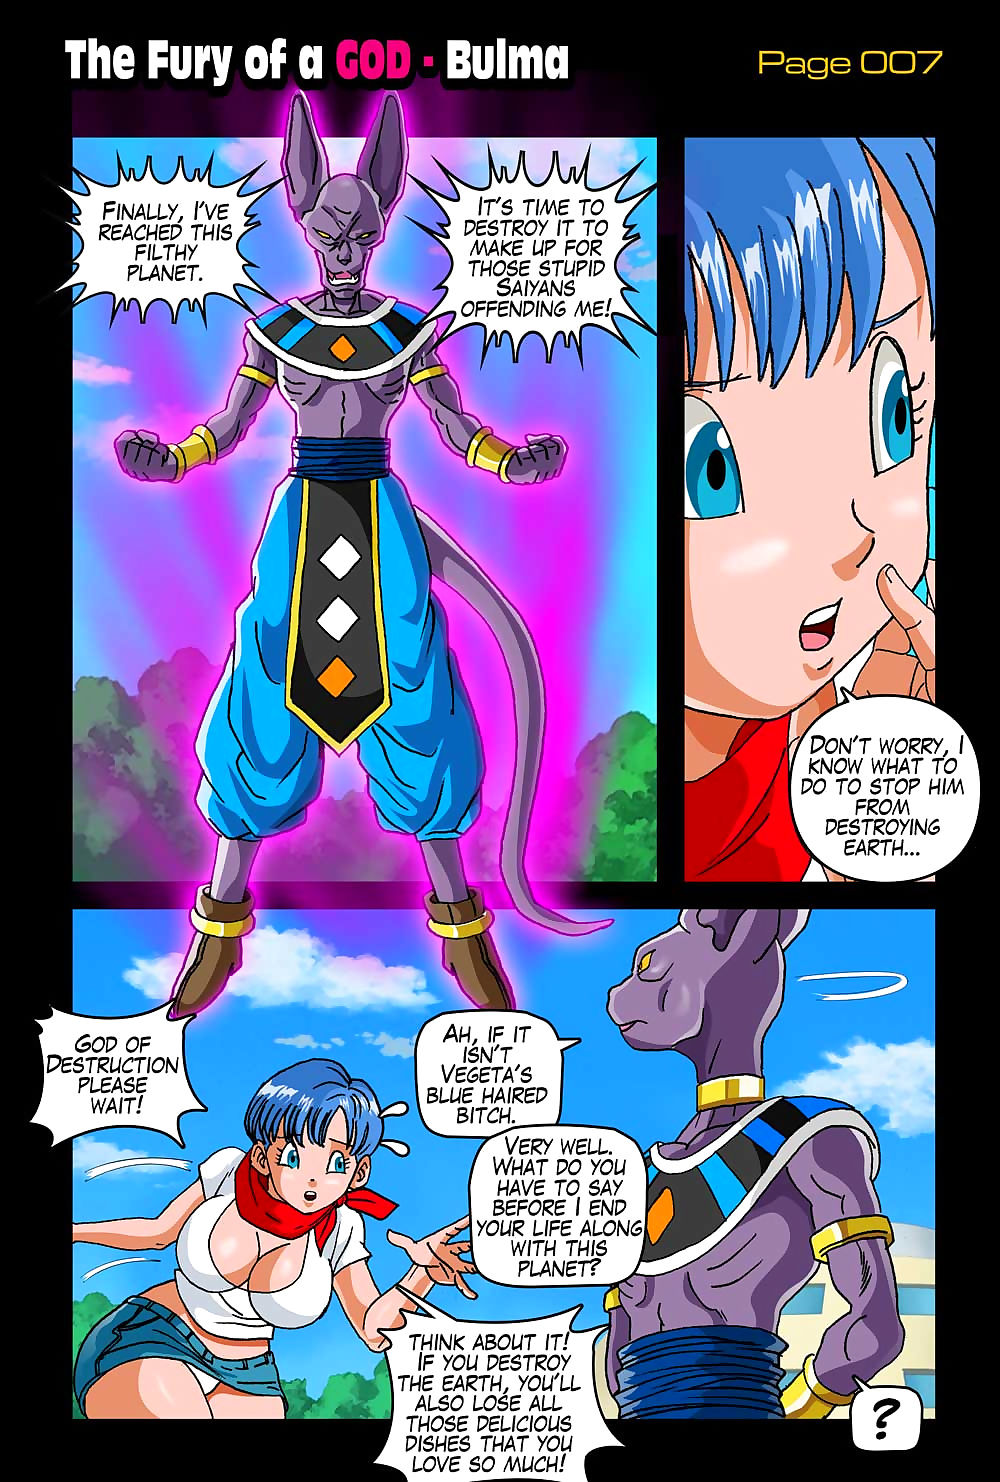 Super Melons- The Fury of a God page 1